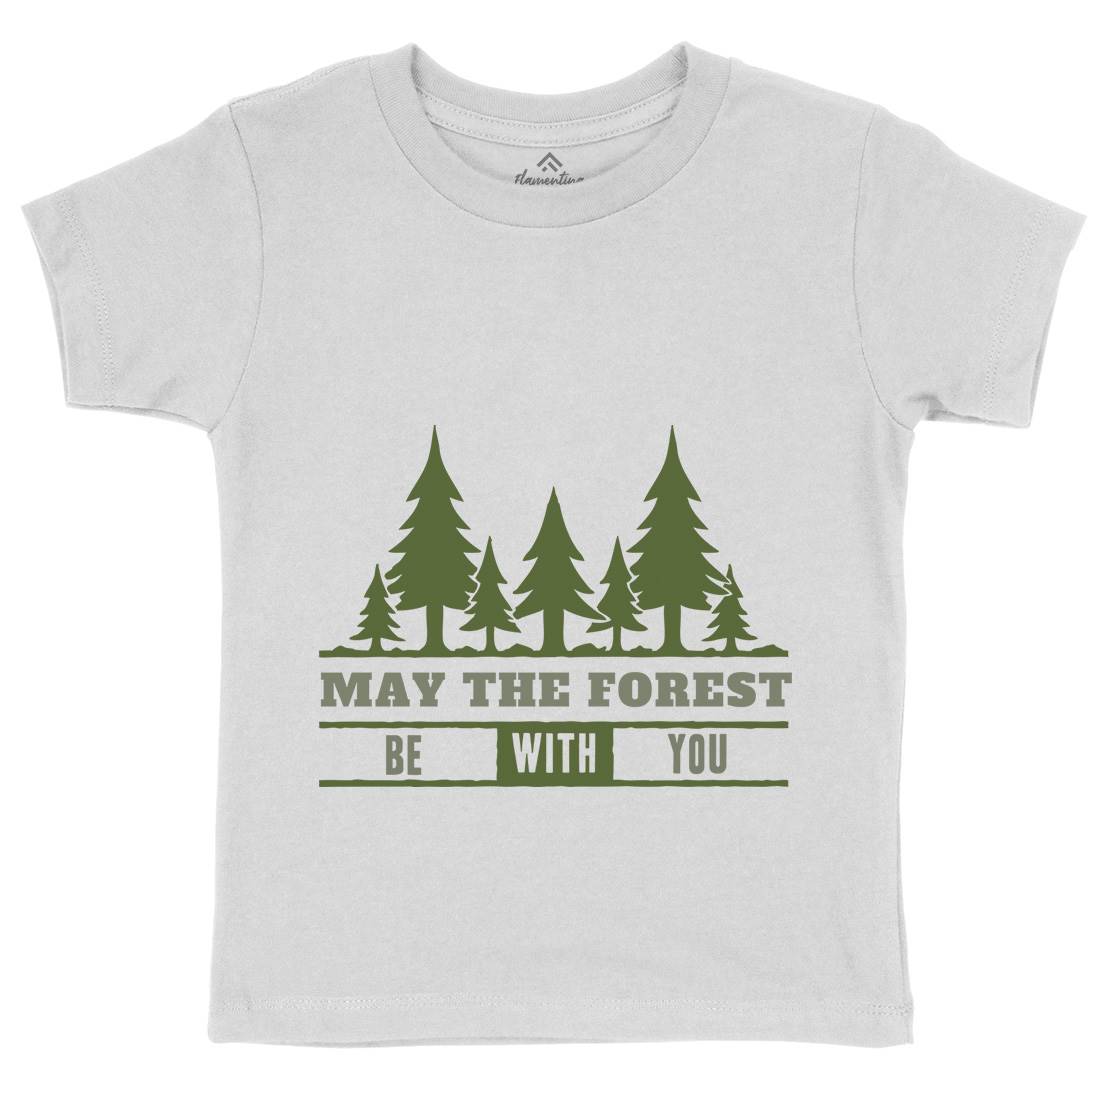 May The Forest Be With You Kids Organic Crew Neck T-Shirt Nature A345